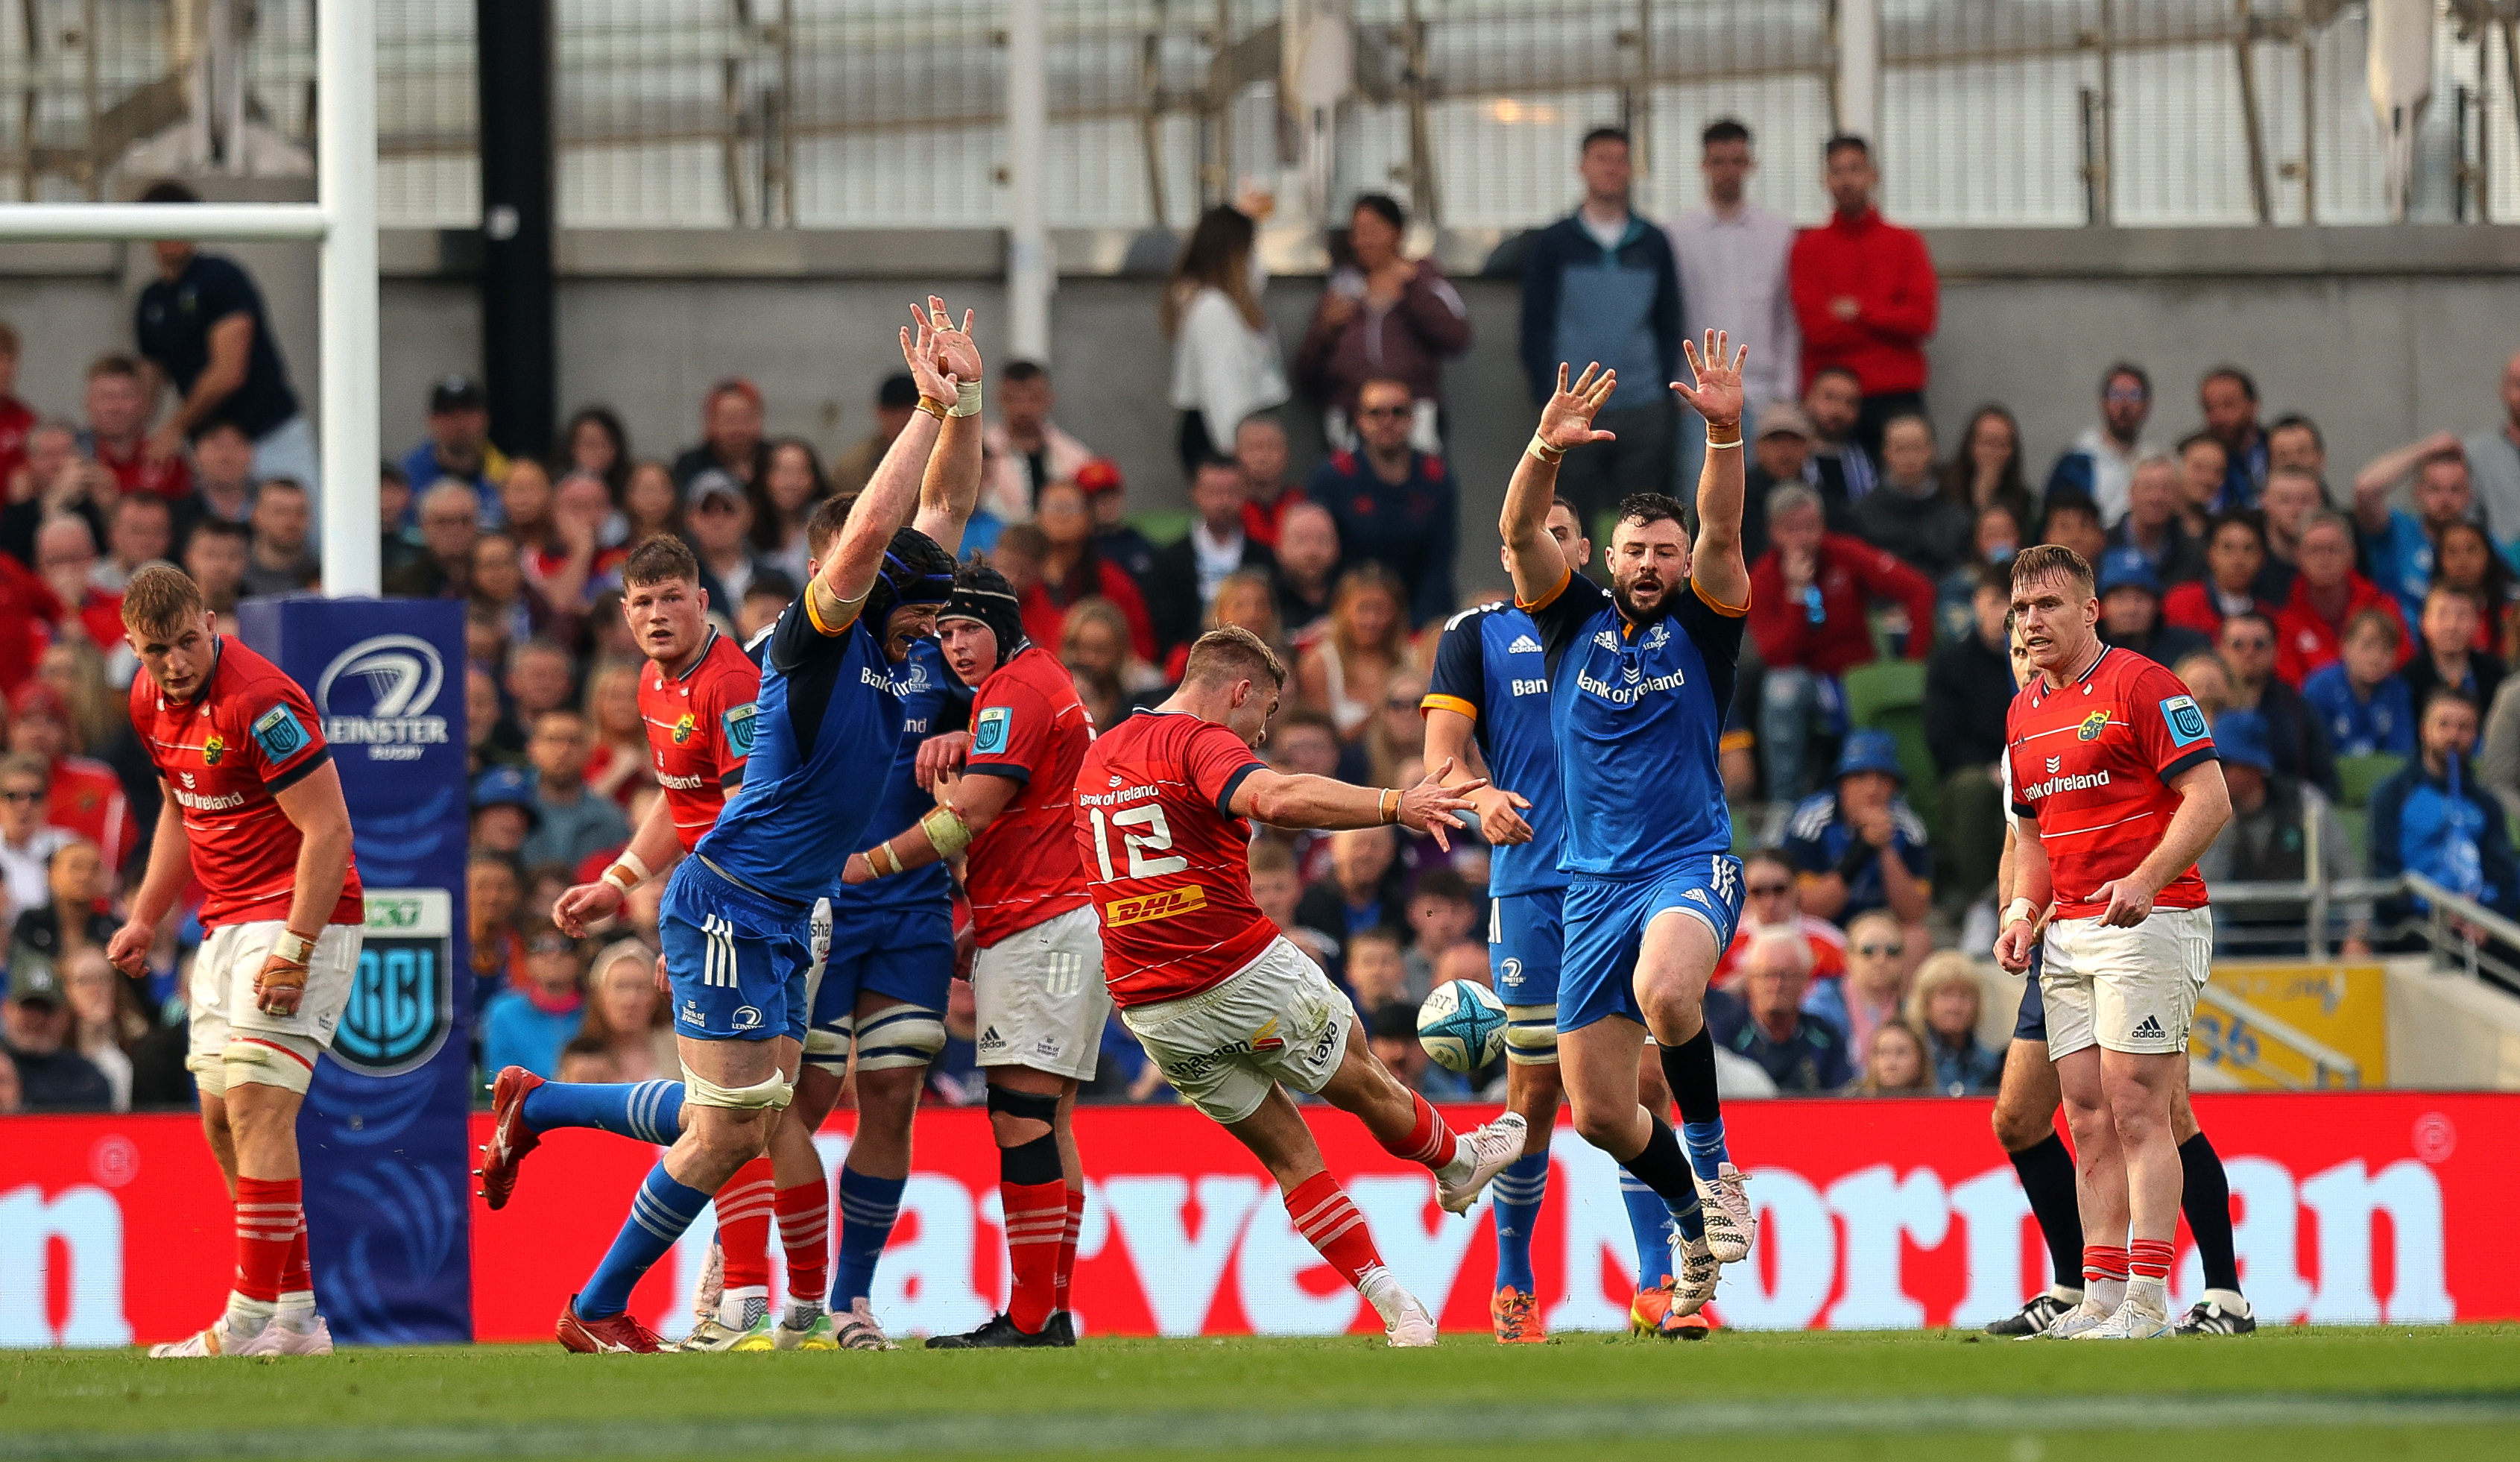 FT Leinster 15 Munster 16 Munster to play Stormers in URC final